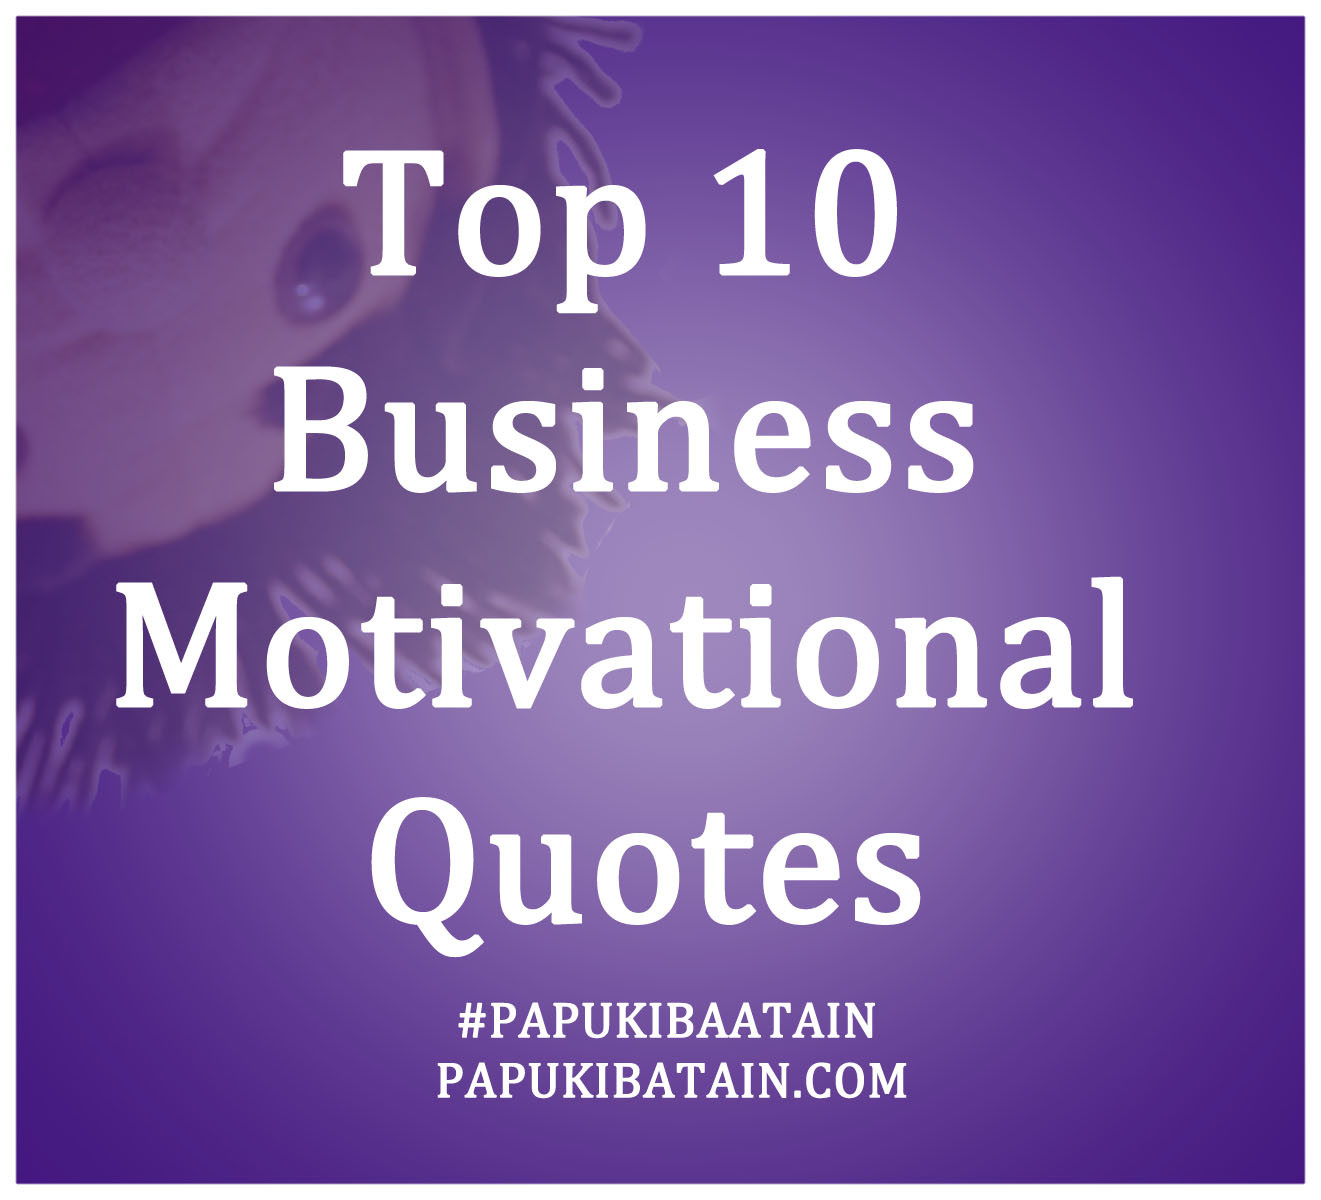 Motivational Quote Business
 Top 10 Business Quotes QuotesGram